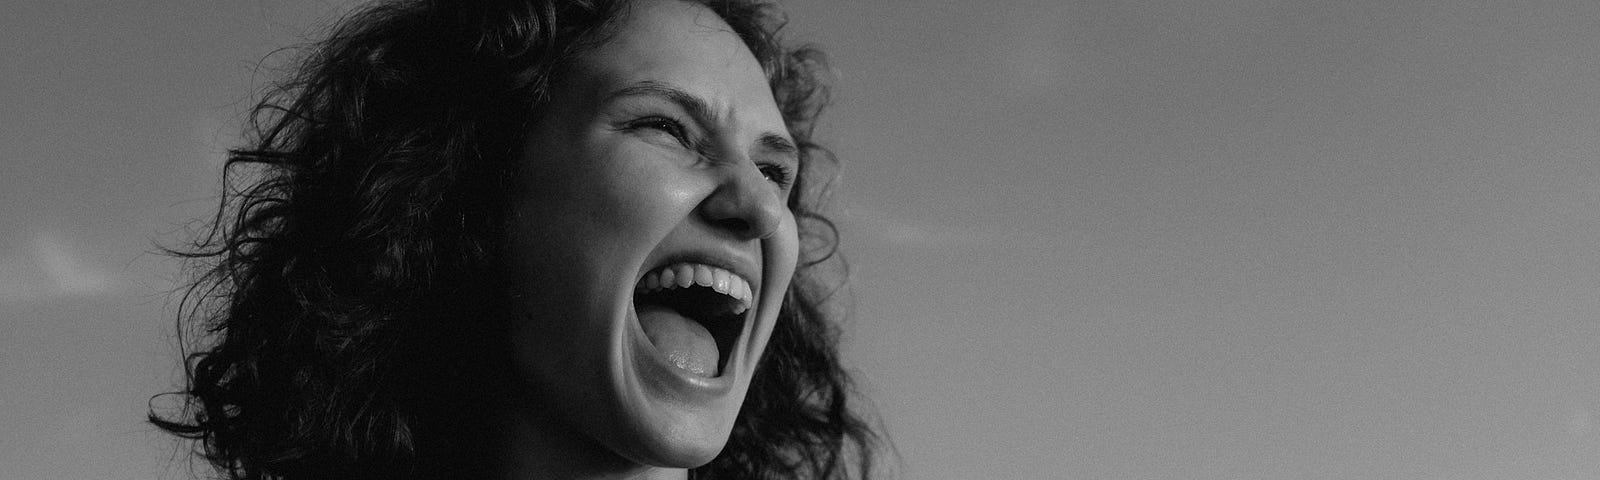 black and white photo of a woman shouting